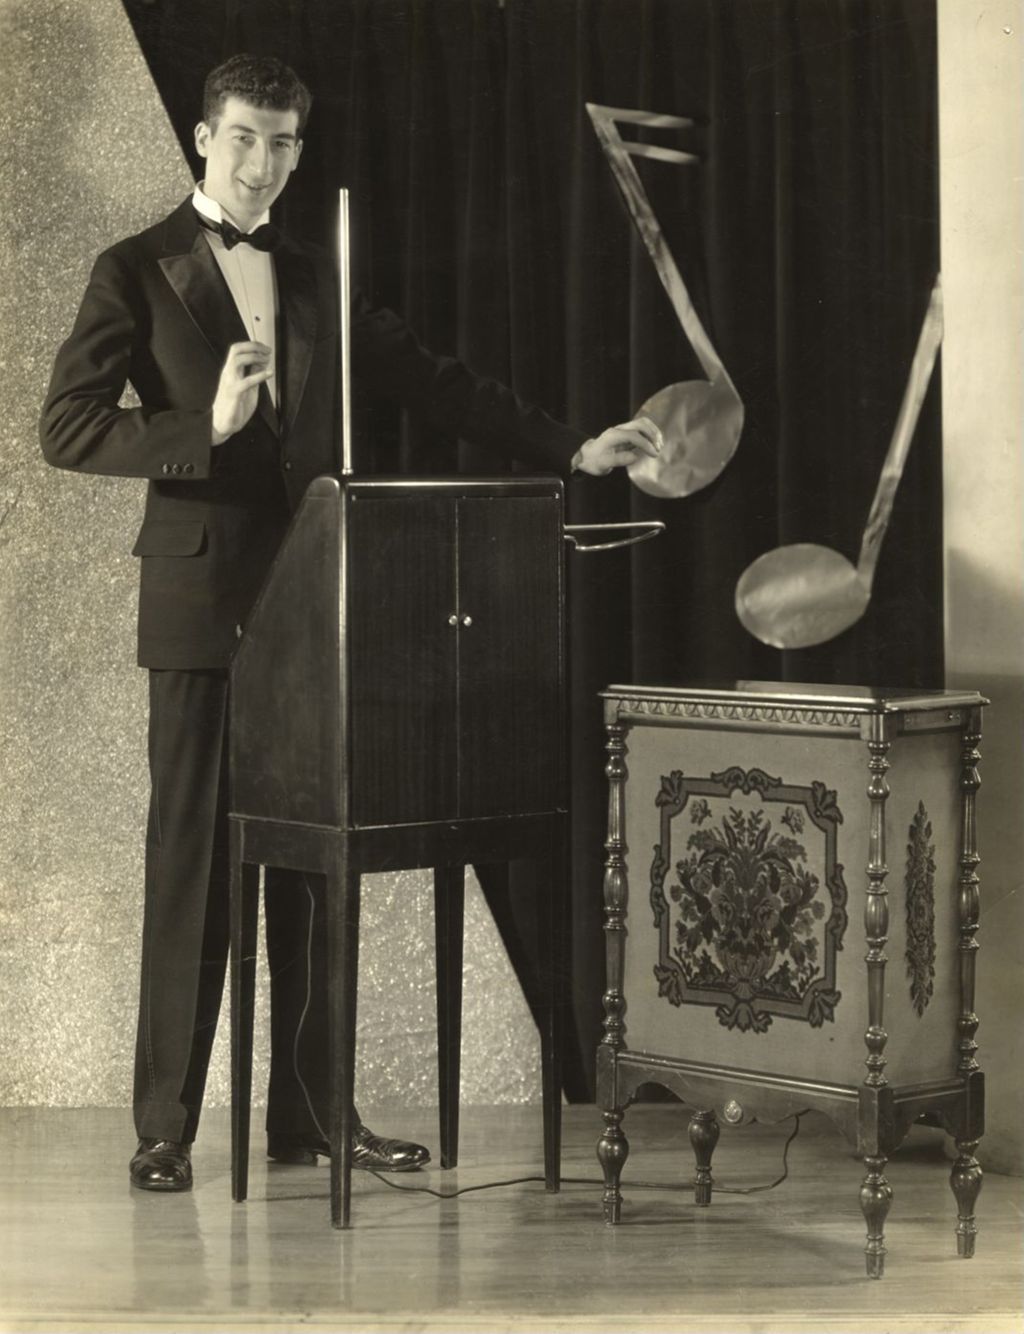 Miniature of Charles Stein demonstrates the use of a theremin musical instrument